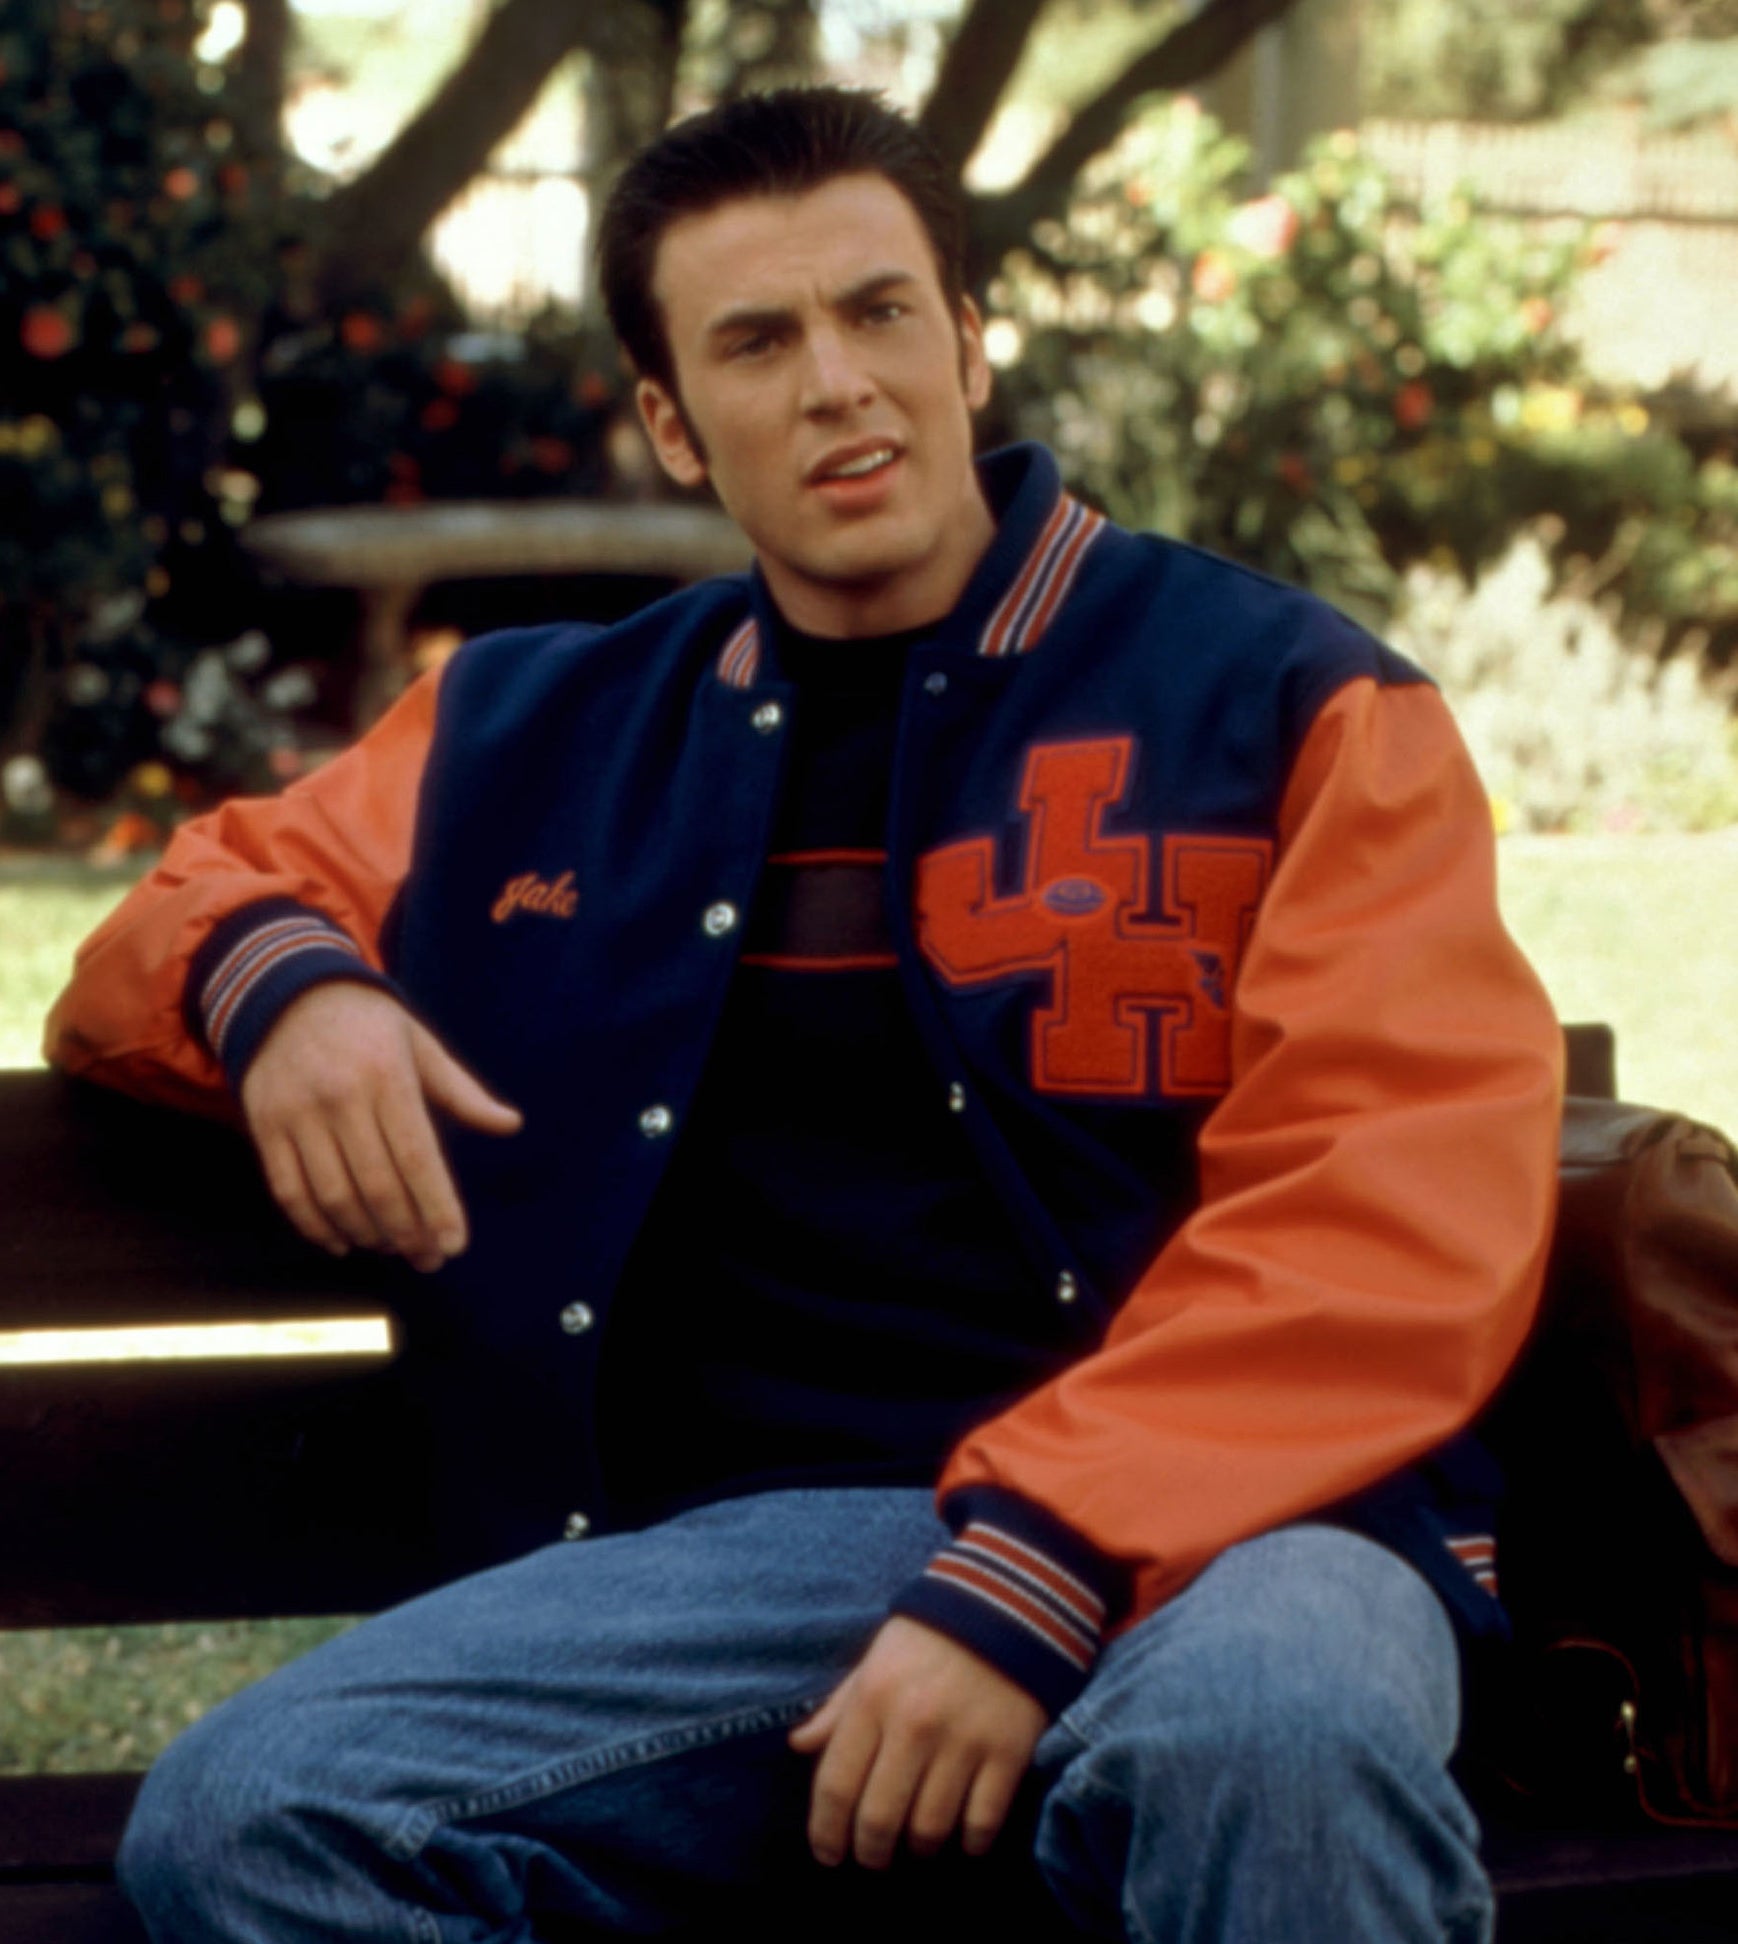 A young Chris Evans wearing a letterman jacket and sitting on a bench